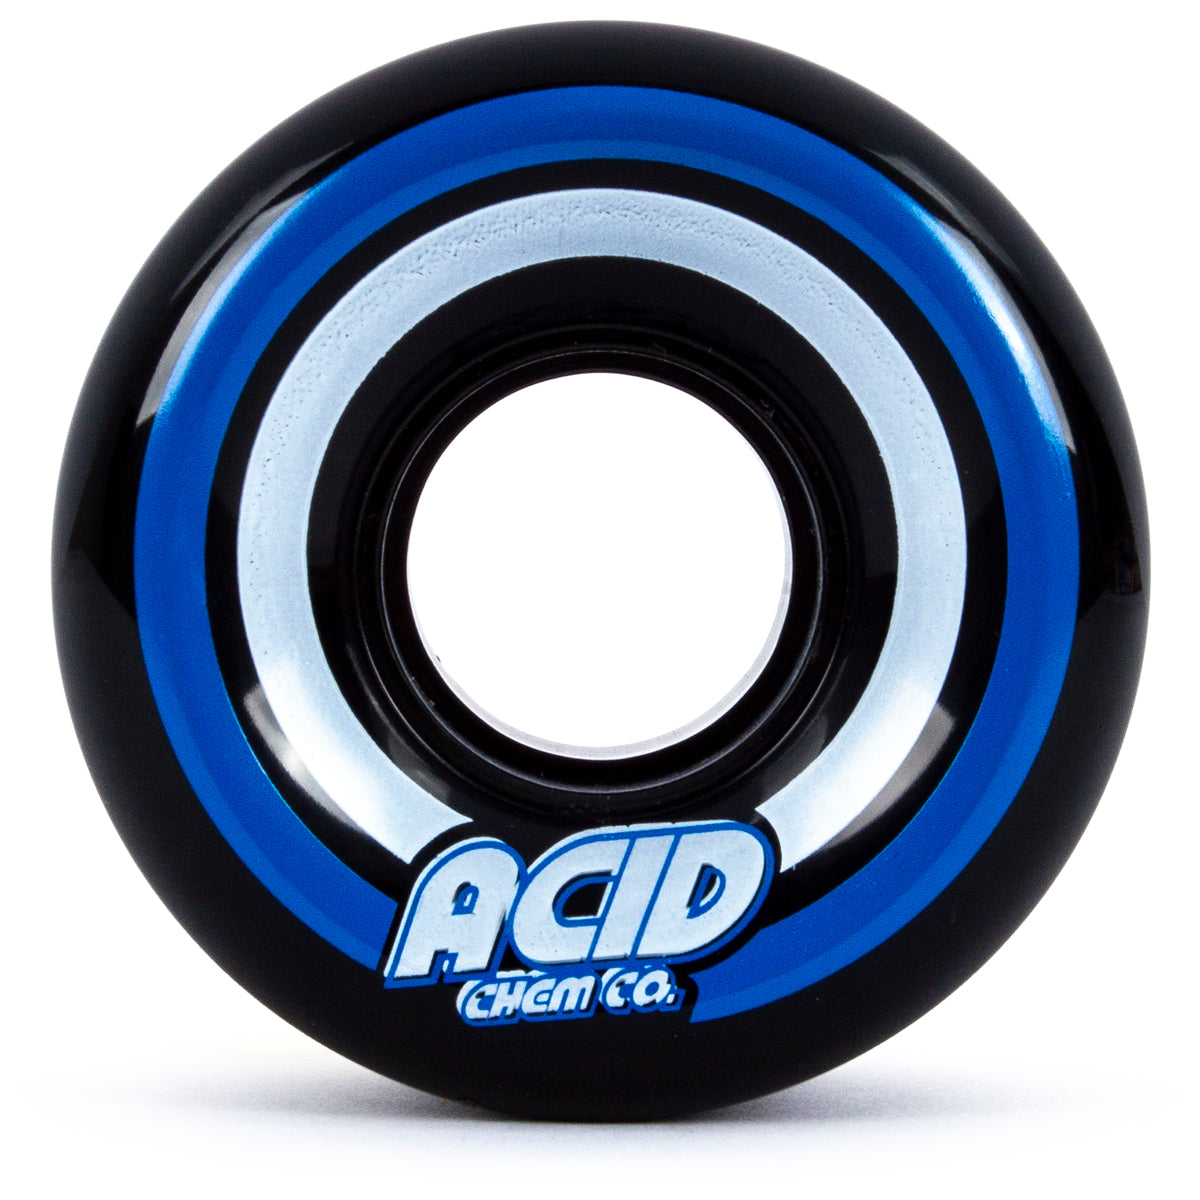 ACID CHEMICIAL CRUISER WHEEL - PODS CONICAL 86A (55MM) - The Drive Skateshop